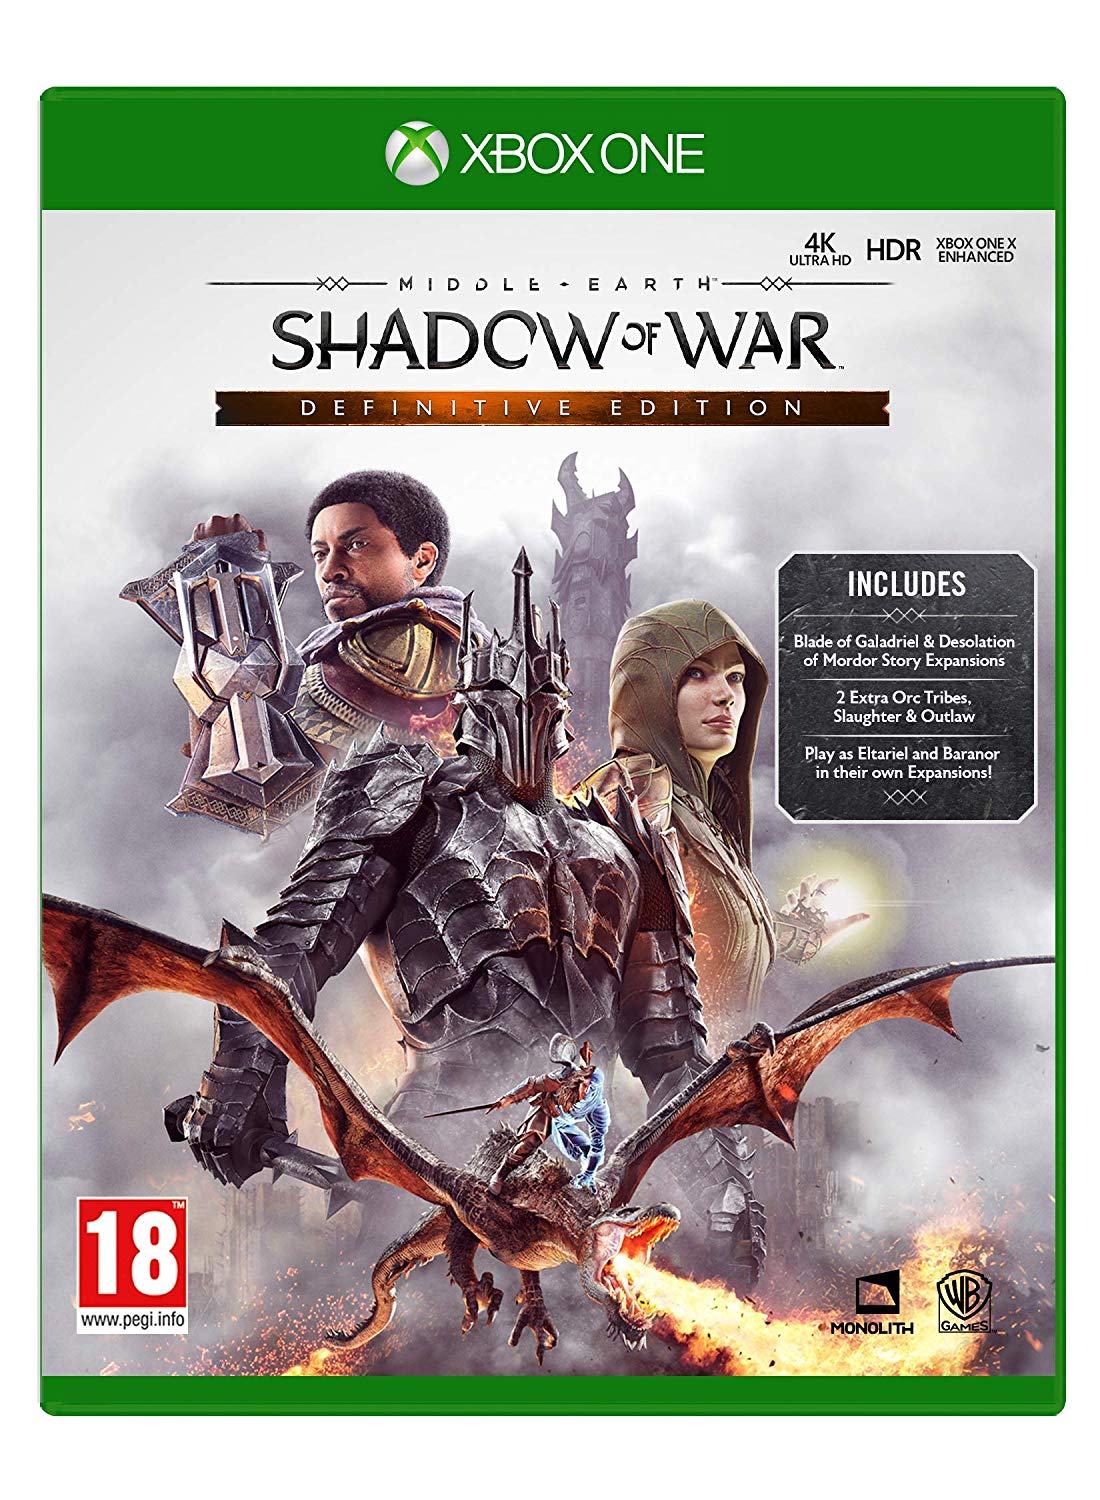 MIDDLE-EARTH: SHADOWS OF WAR FULL/XBOX/+GIFT 2 GAMES🎮